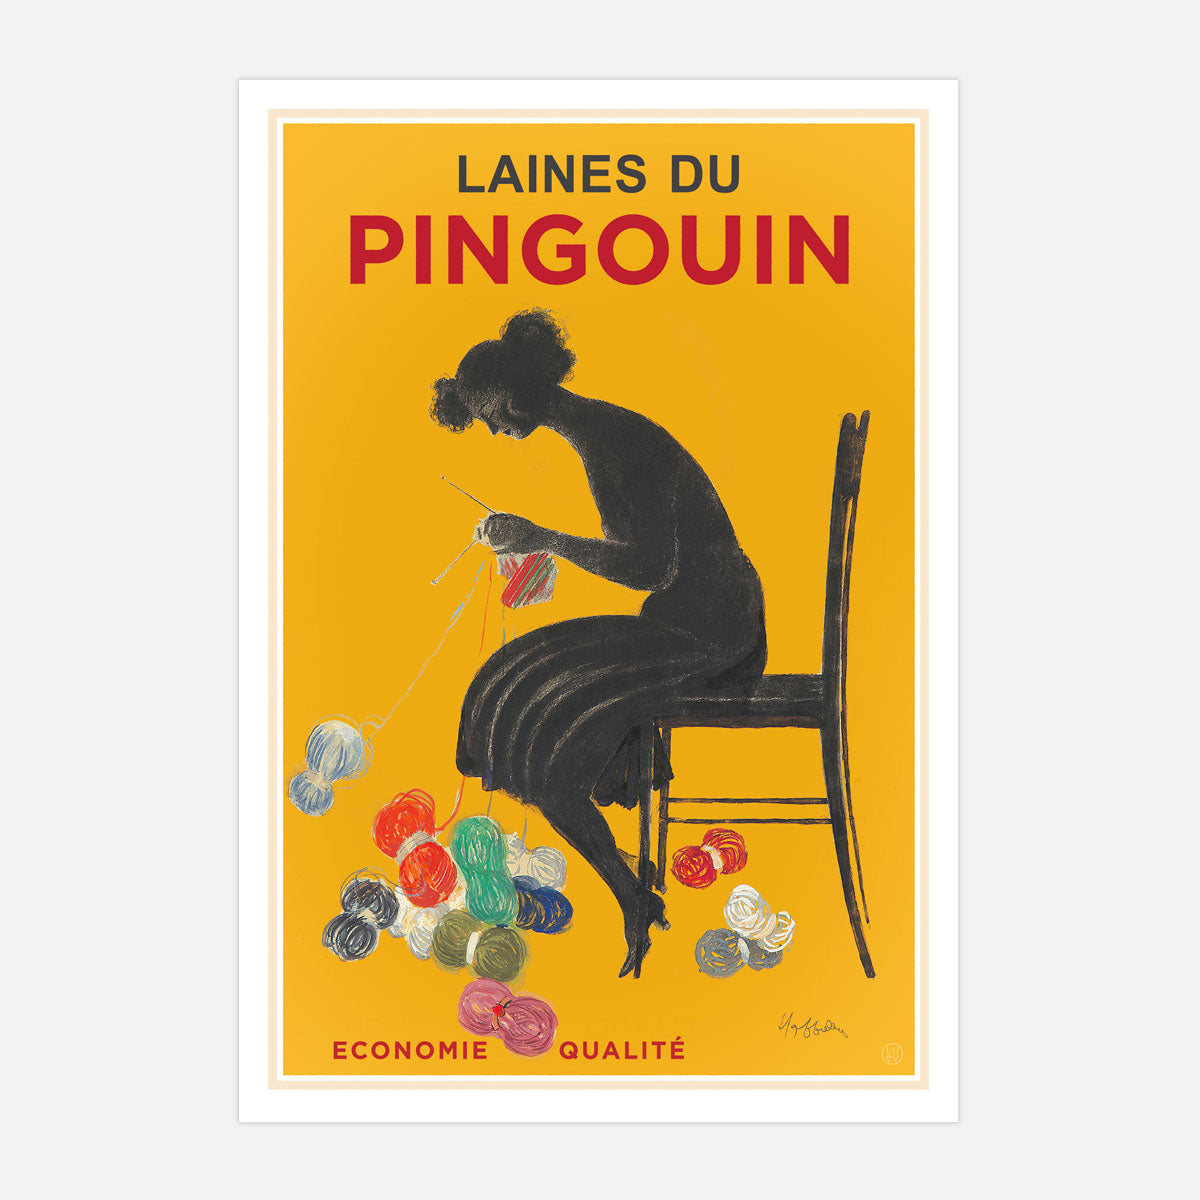 Laines du Pingouin retro vintage advertising print from Places We Luv